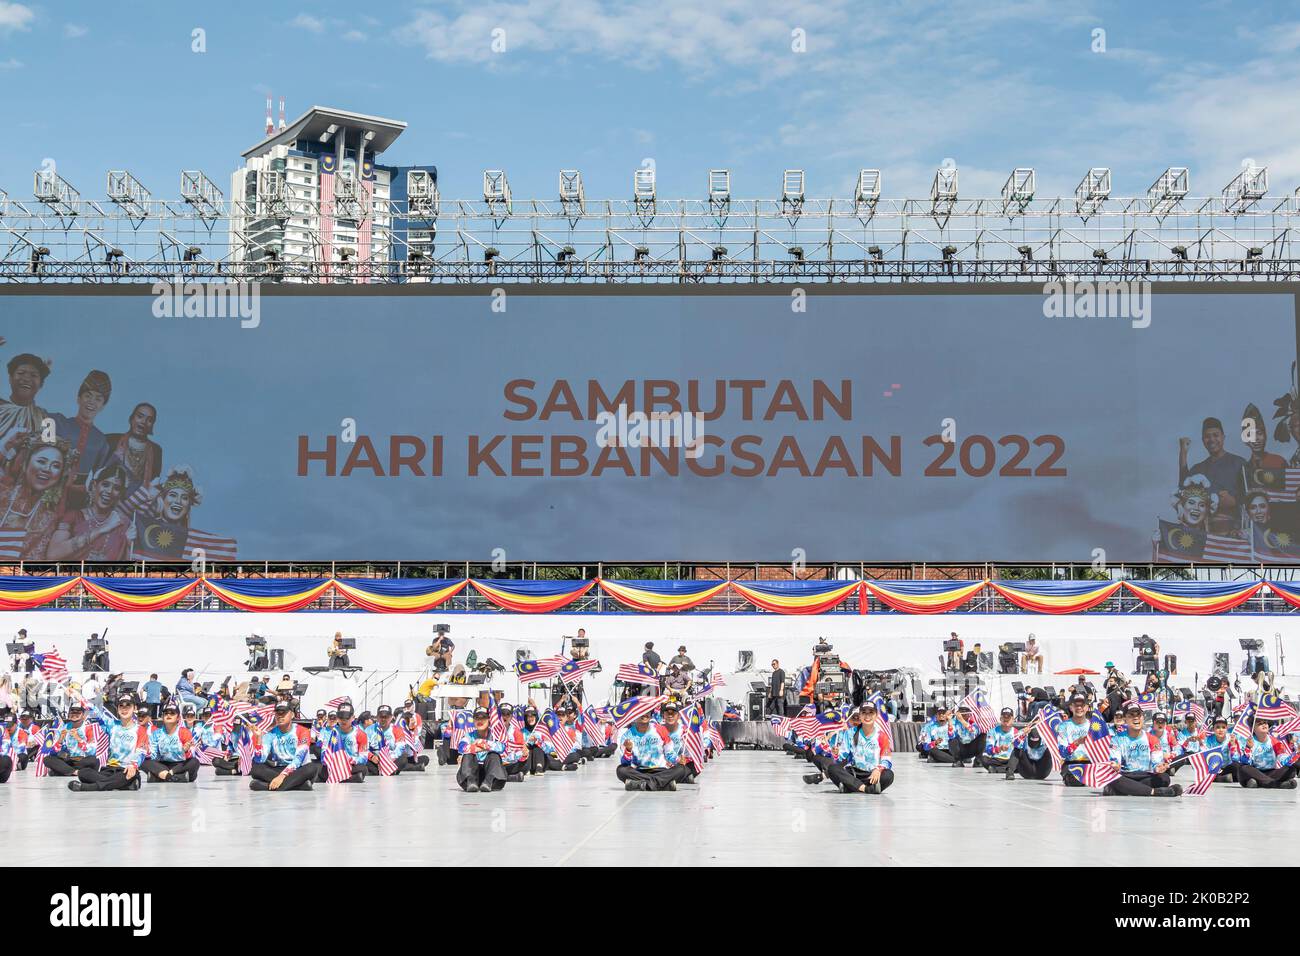 Malaysian dance performers waving Malaysia's flags during rehearsal practise for 65th Malaysia National Day celebration in Kuala Lumpur, Malaysia. Stock Photo